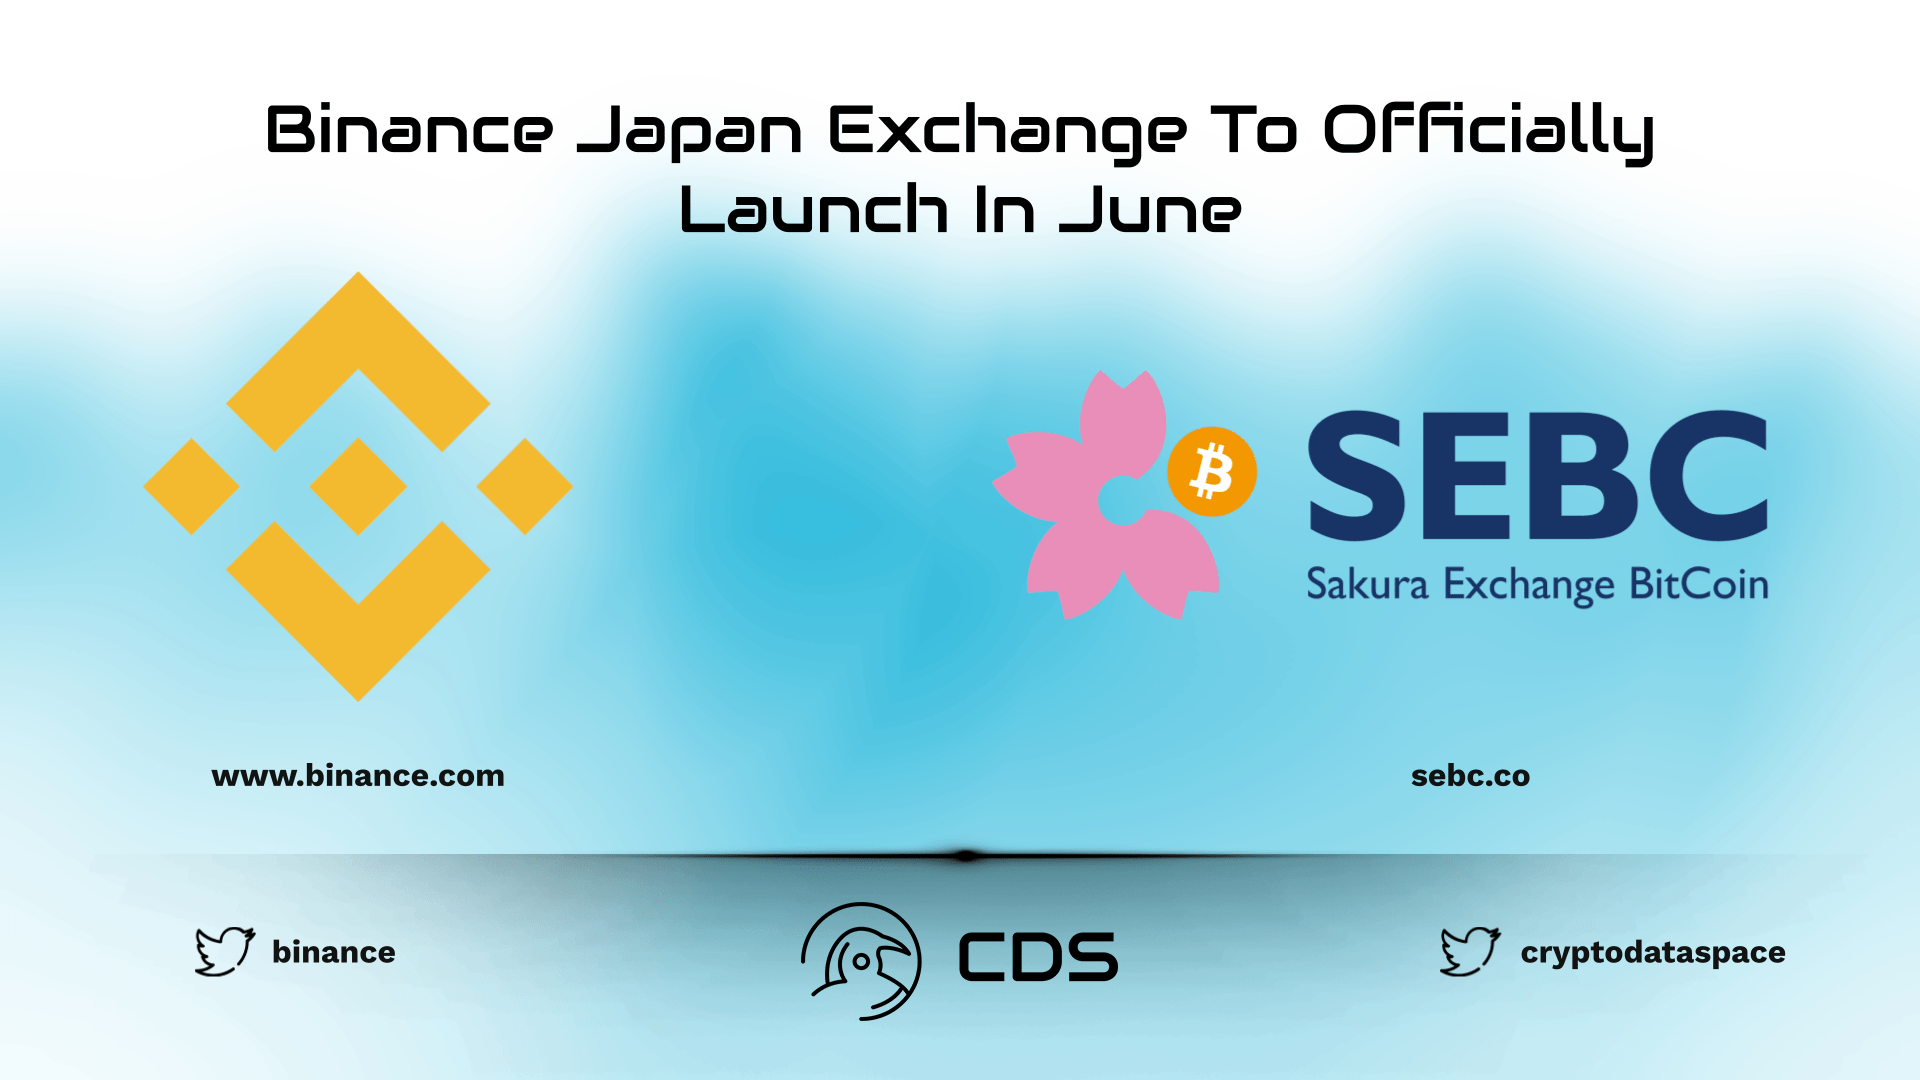 Binance Japan Exchange To Officially Launch In June